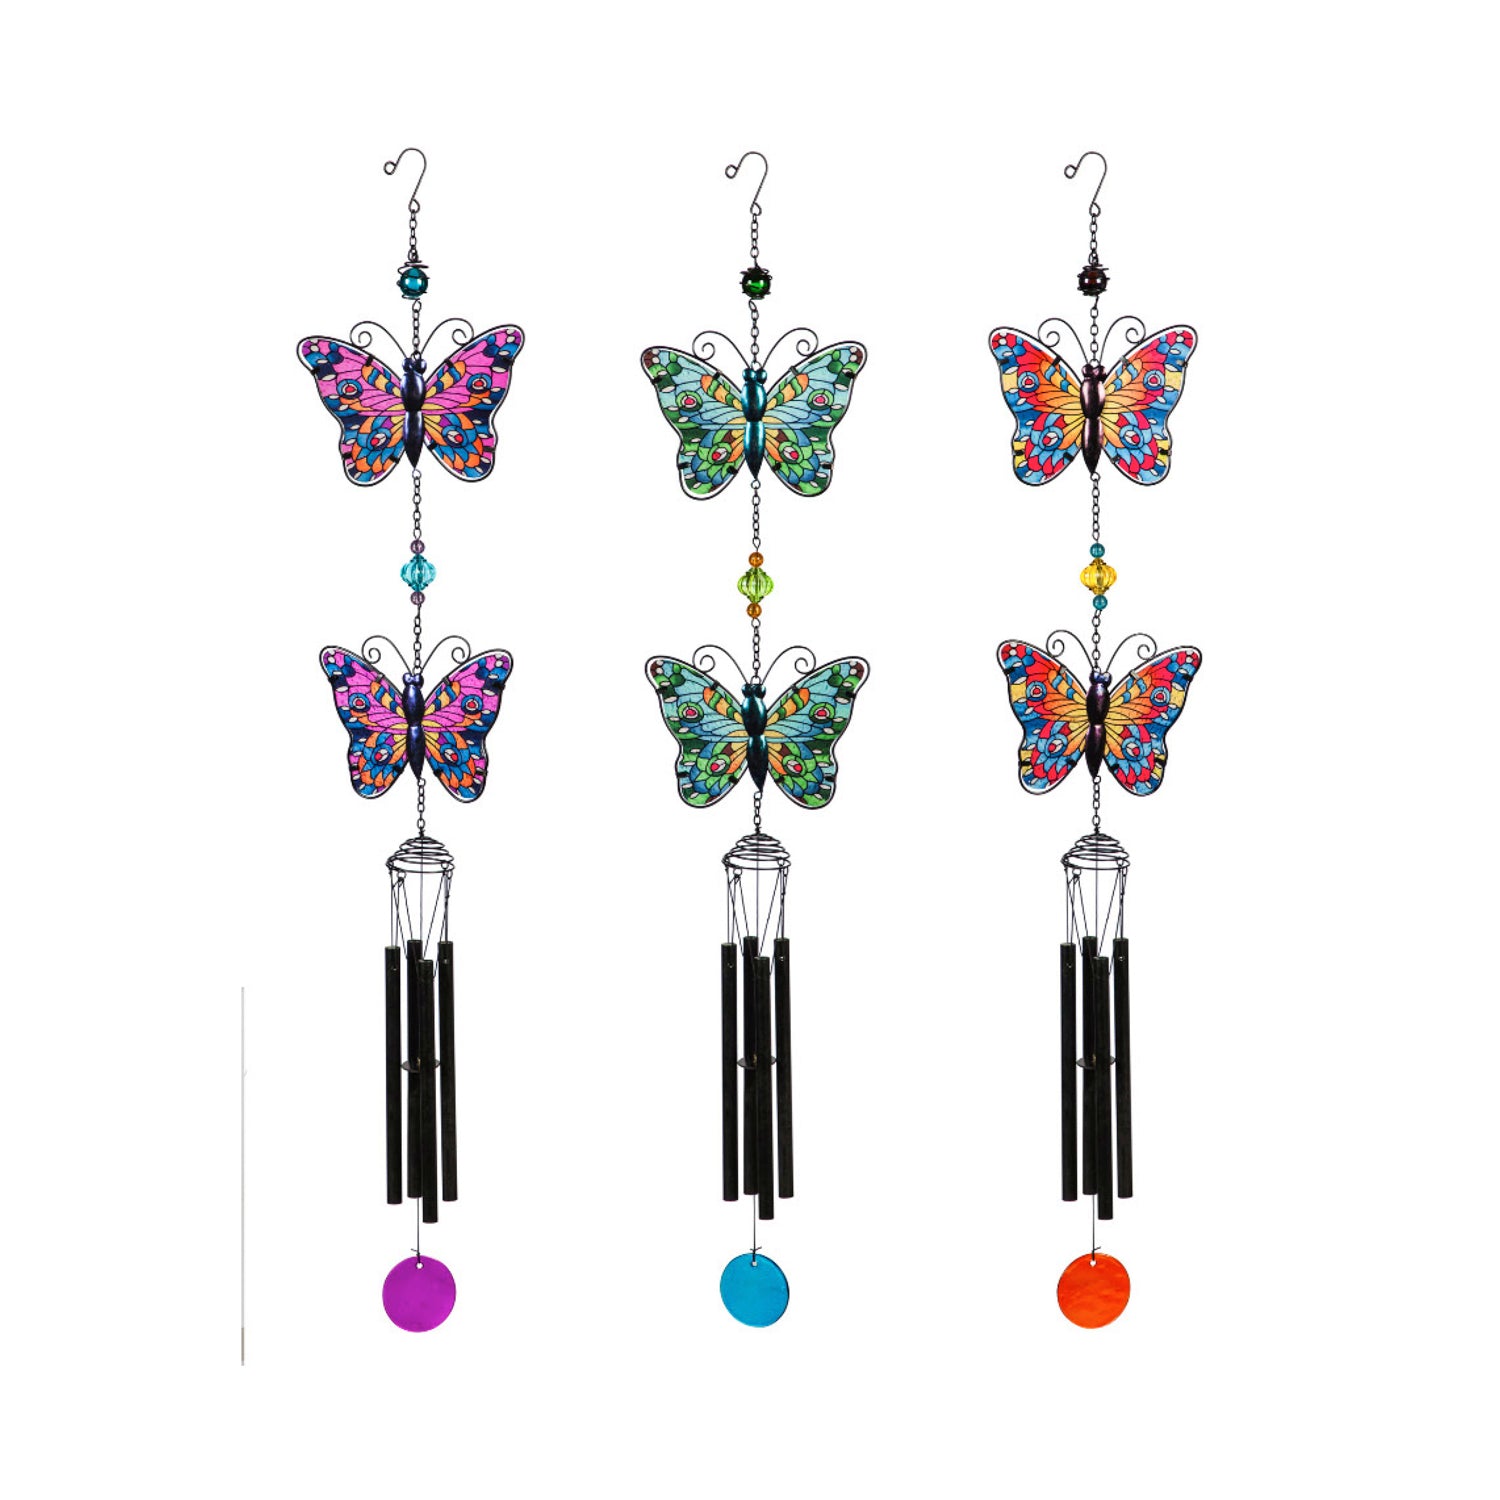 Tiered Butterfly Wind Chime, Stained Glass Finish